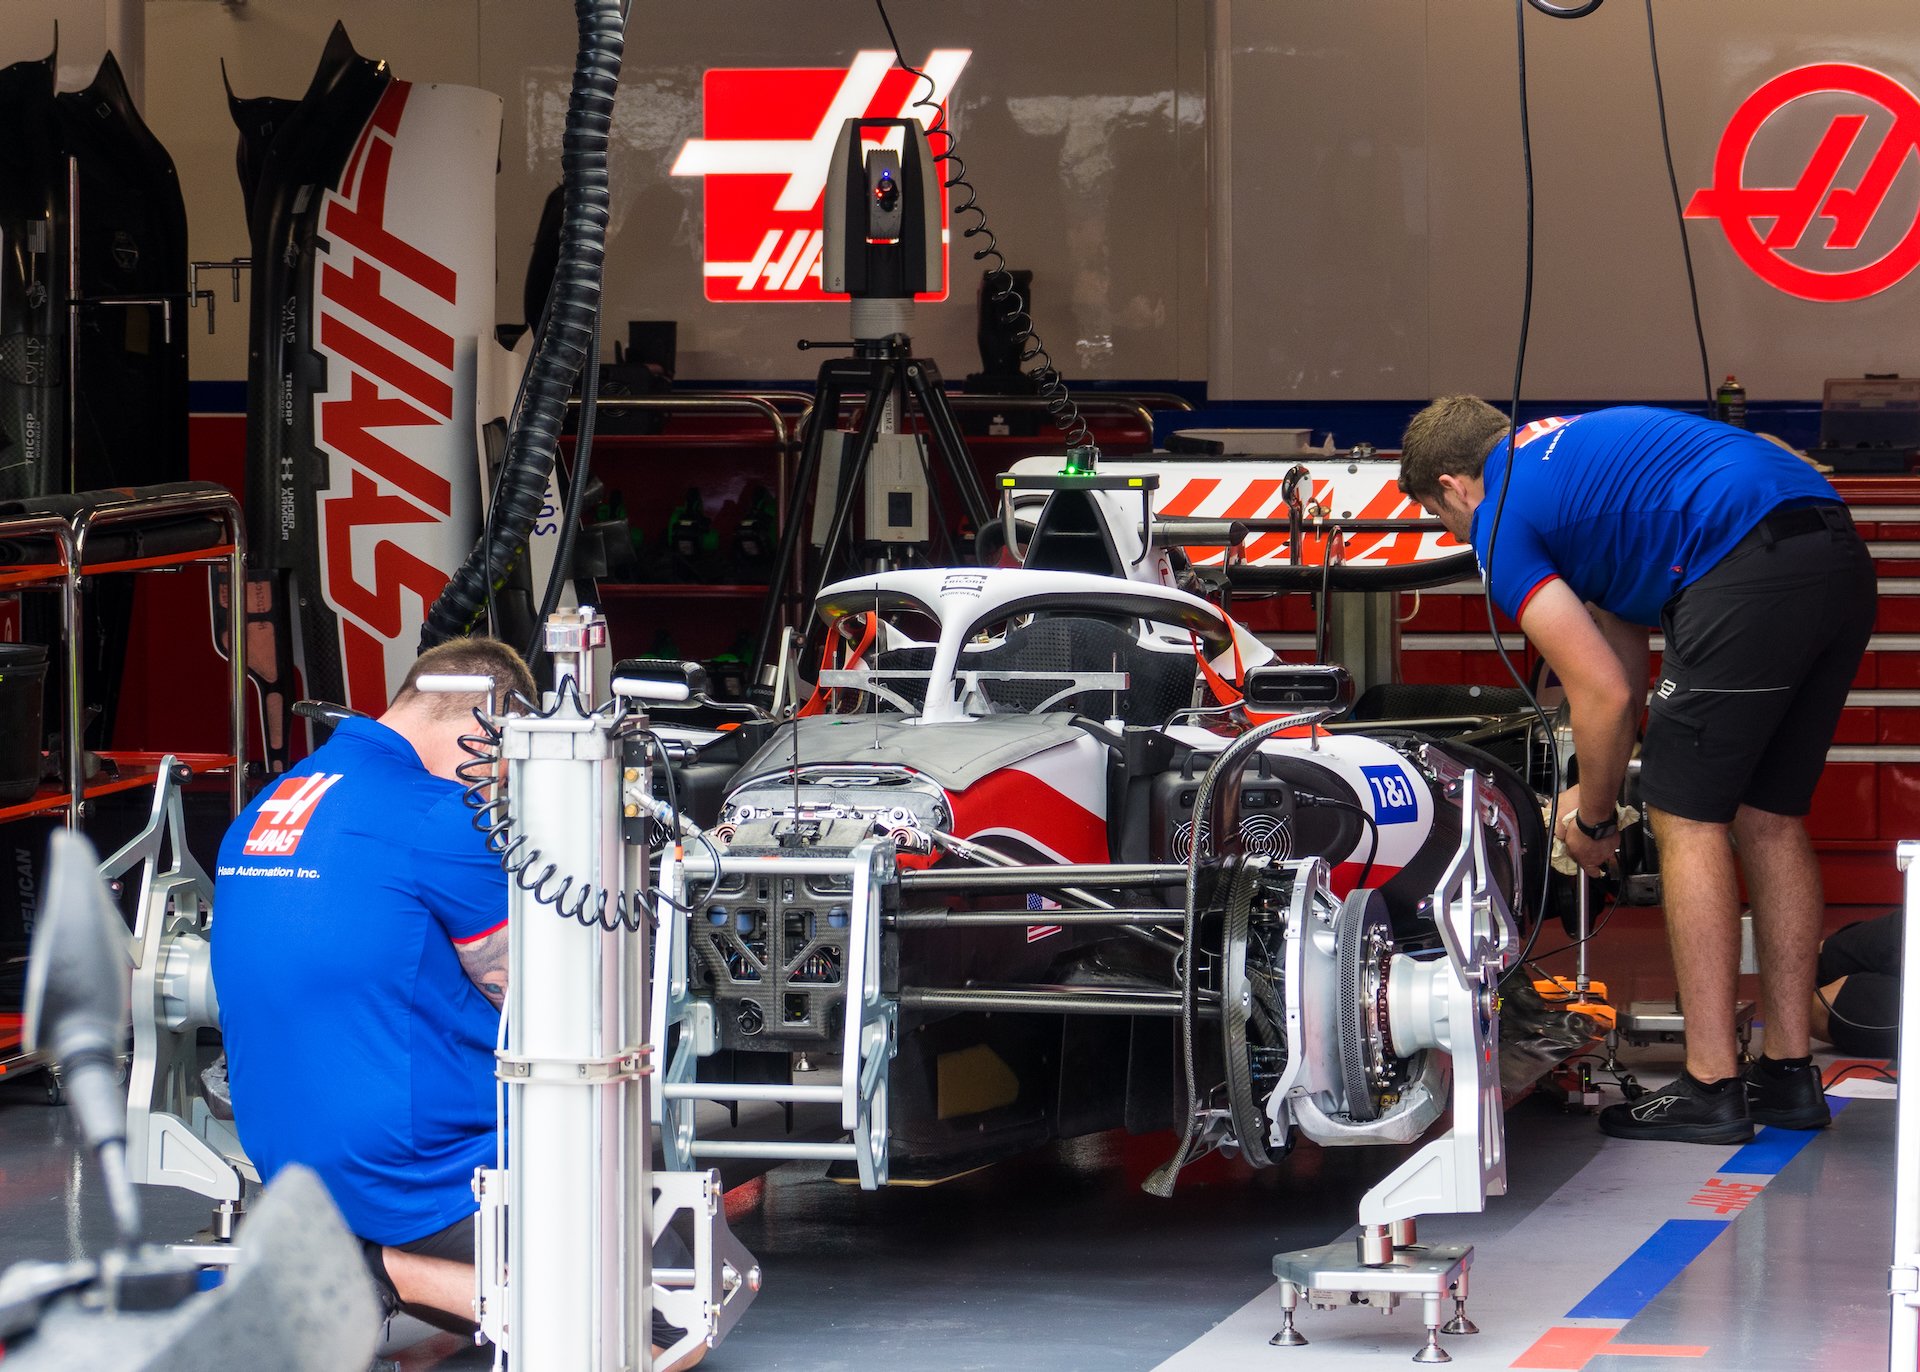  The Haas car under assembly.  